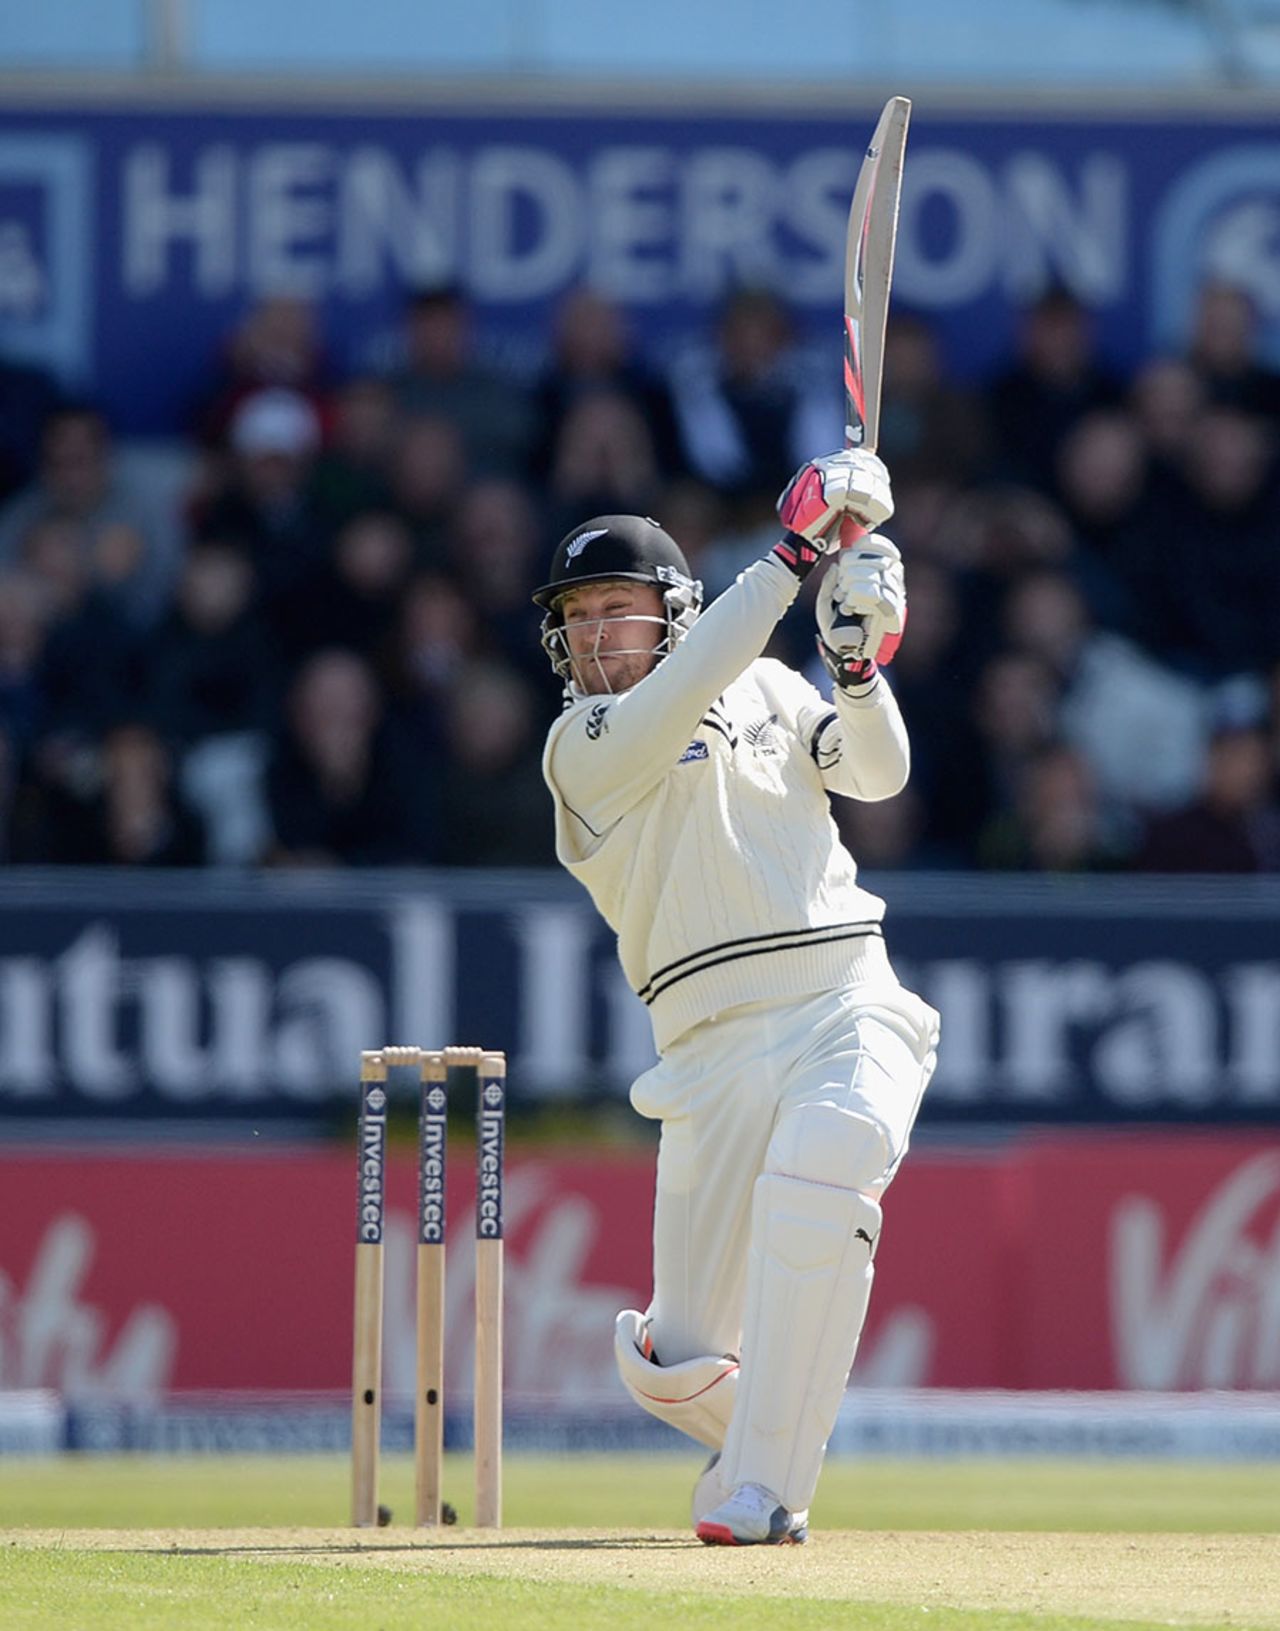 First ball? No problem. Brendon McCullum whacks it over cover for six, England v New Zealand, 2nd Investec Test, Headingley, 1st day, May 29, 2015